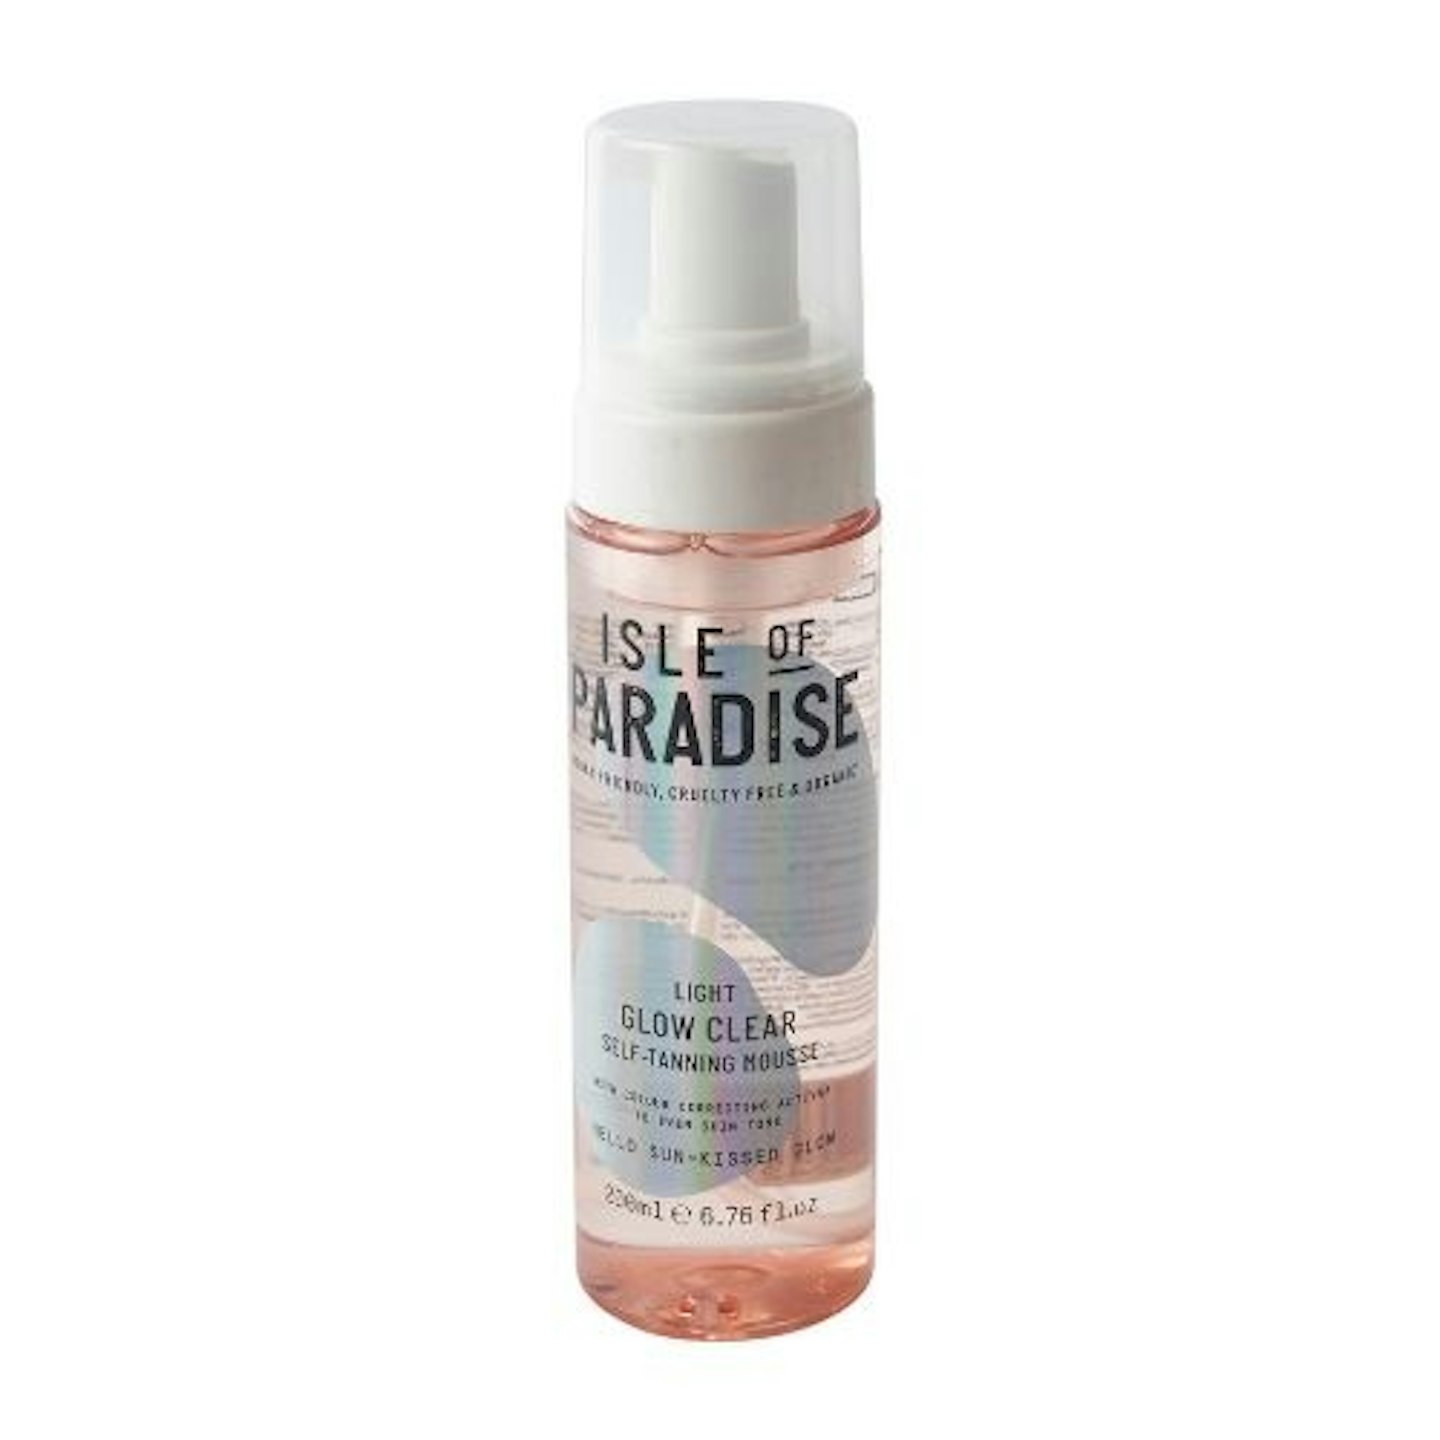 Isle Of Paradise Glow Clear Self-Tanning Mousse